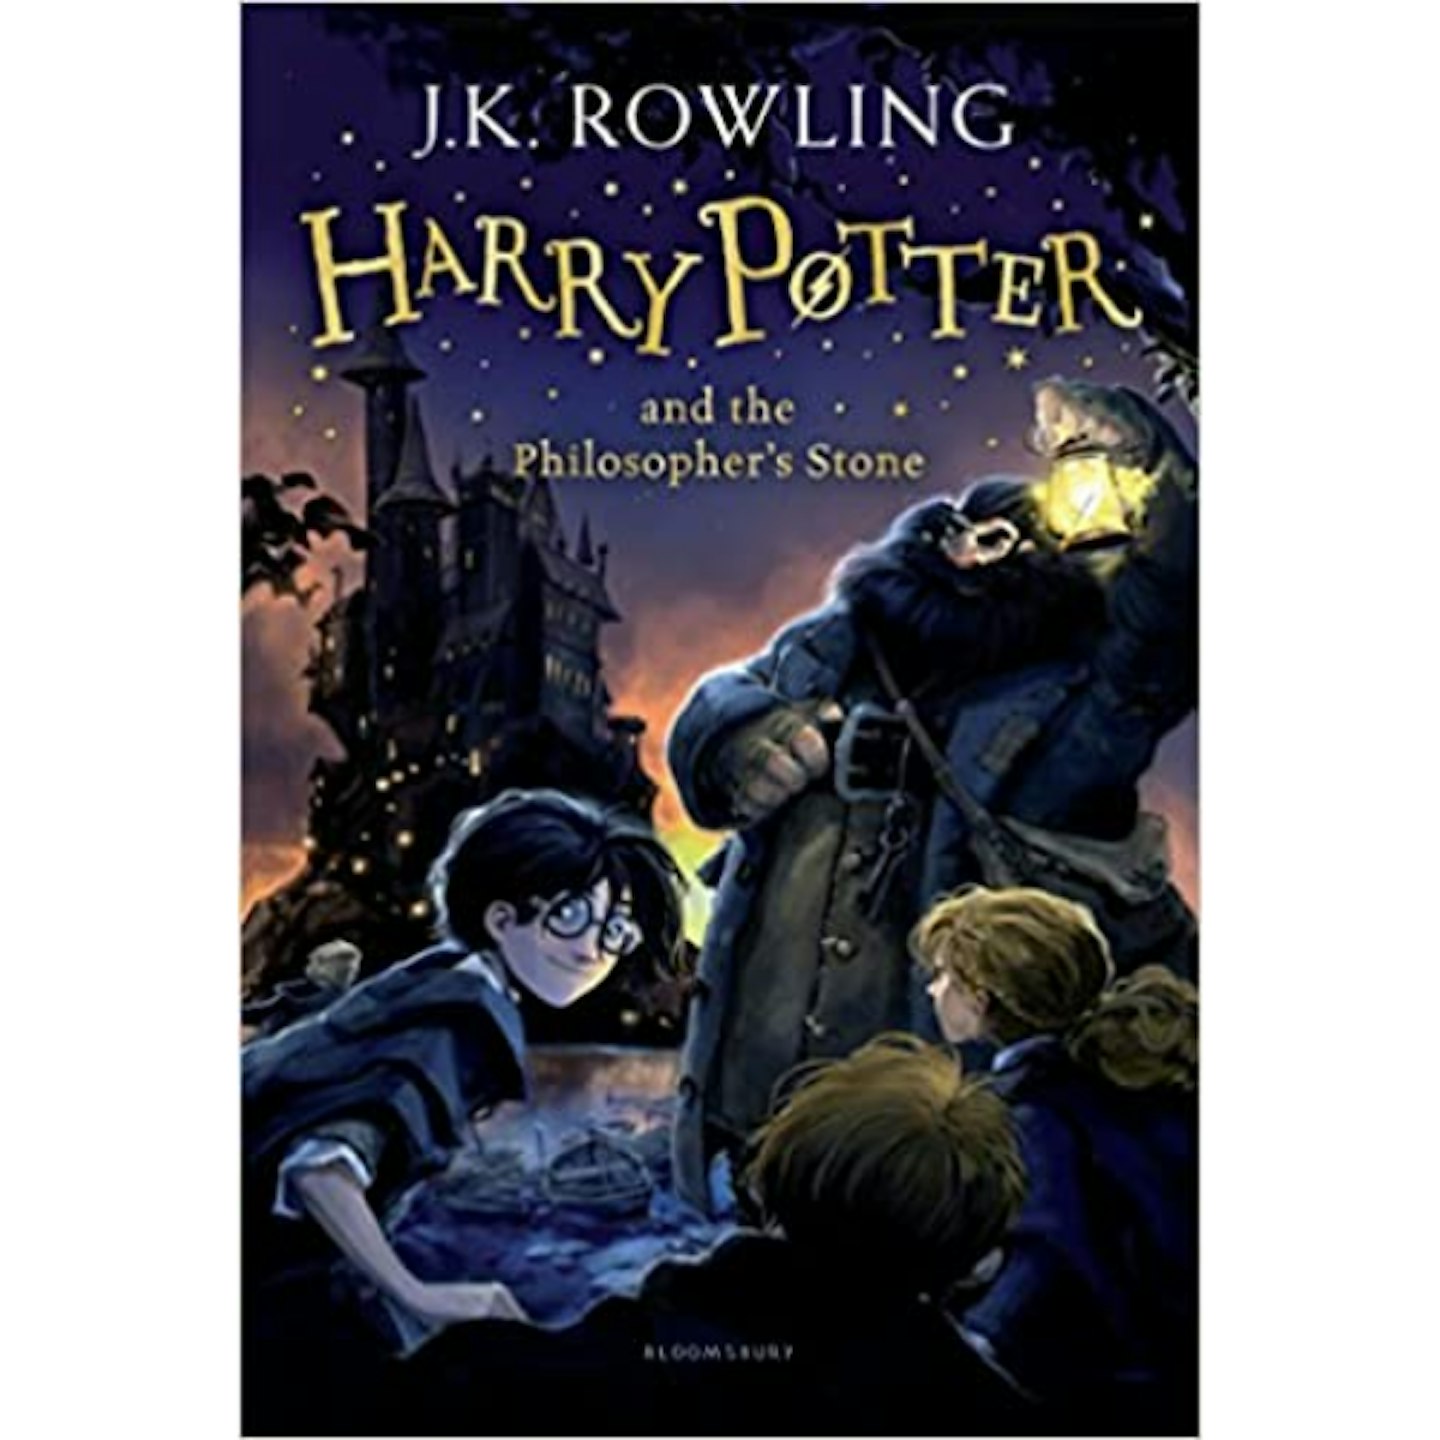 Harry Potter and the Philosopher's Stone by J.K. Rowling  